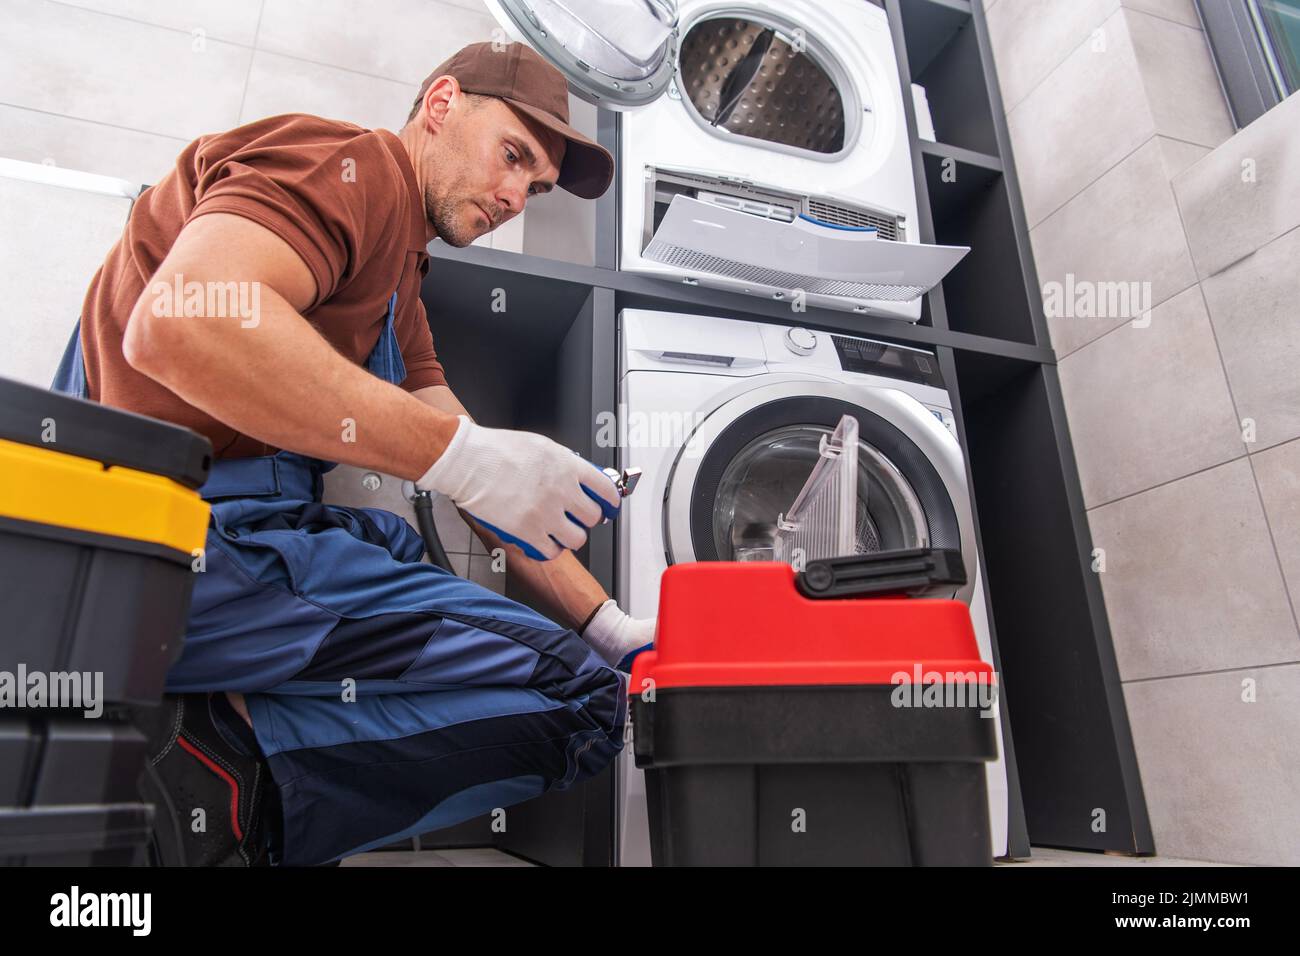 Caucasian Worker at His 40s Fixing and Unclogging the Washing Machine in His Client’s Laundry Room. Professional Home Repair Services Theme. Stock Photo